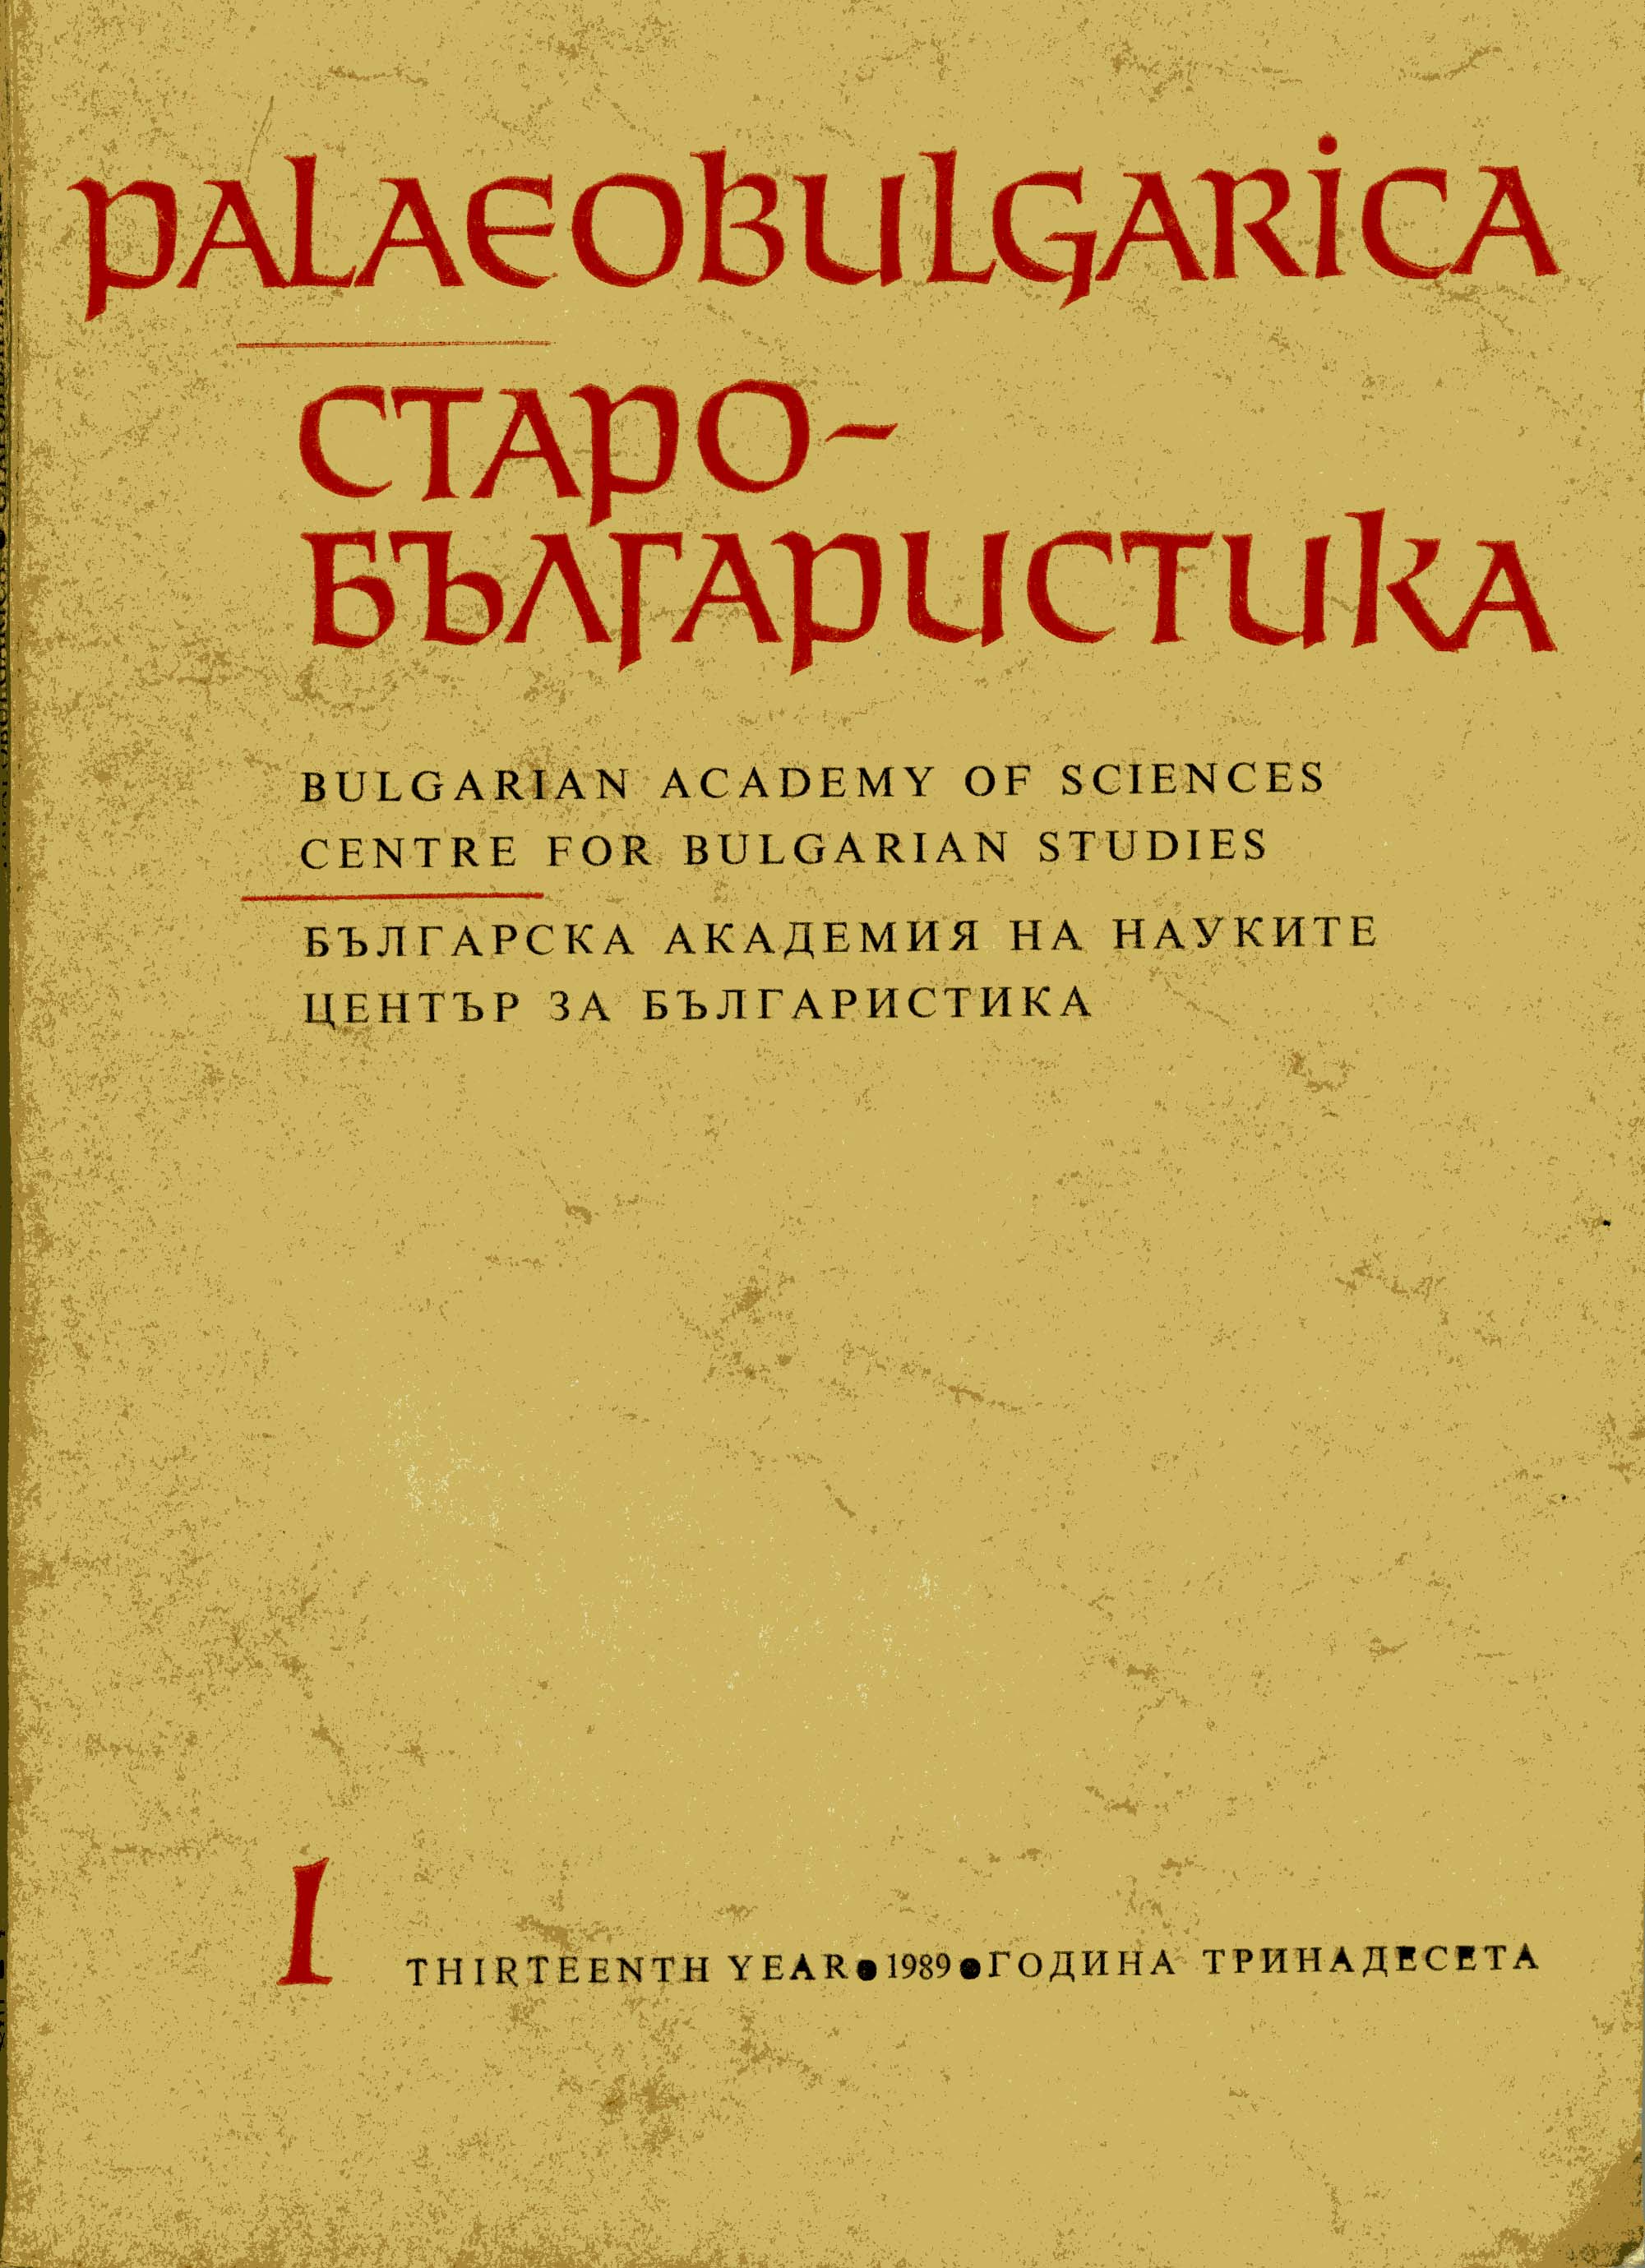 The Problems of Old Bulgarian Culture Discussed at the 10th International Congress of Slavonic Scholars Cover Image